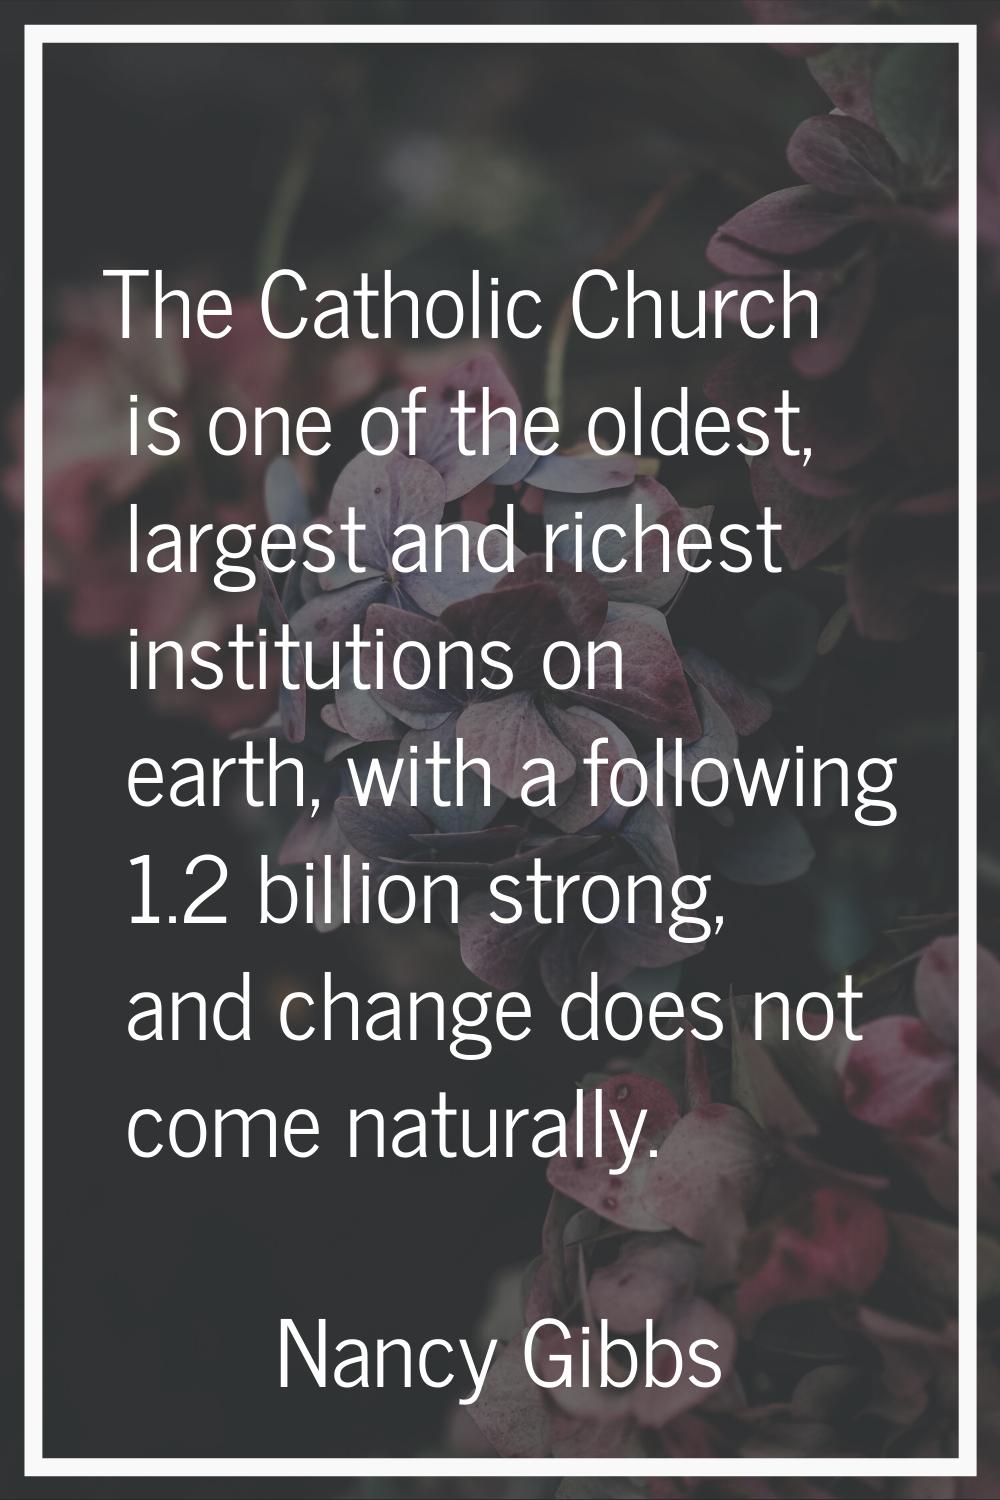 The Catholic Church is one of the oldest, largest and richest institutions on earth, with a followi